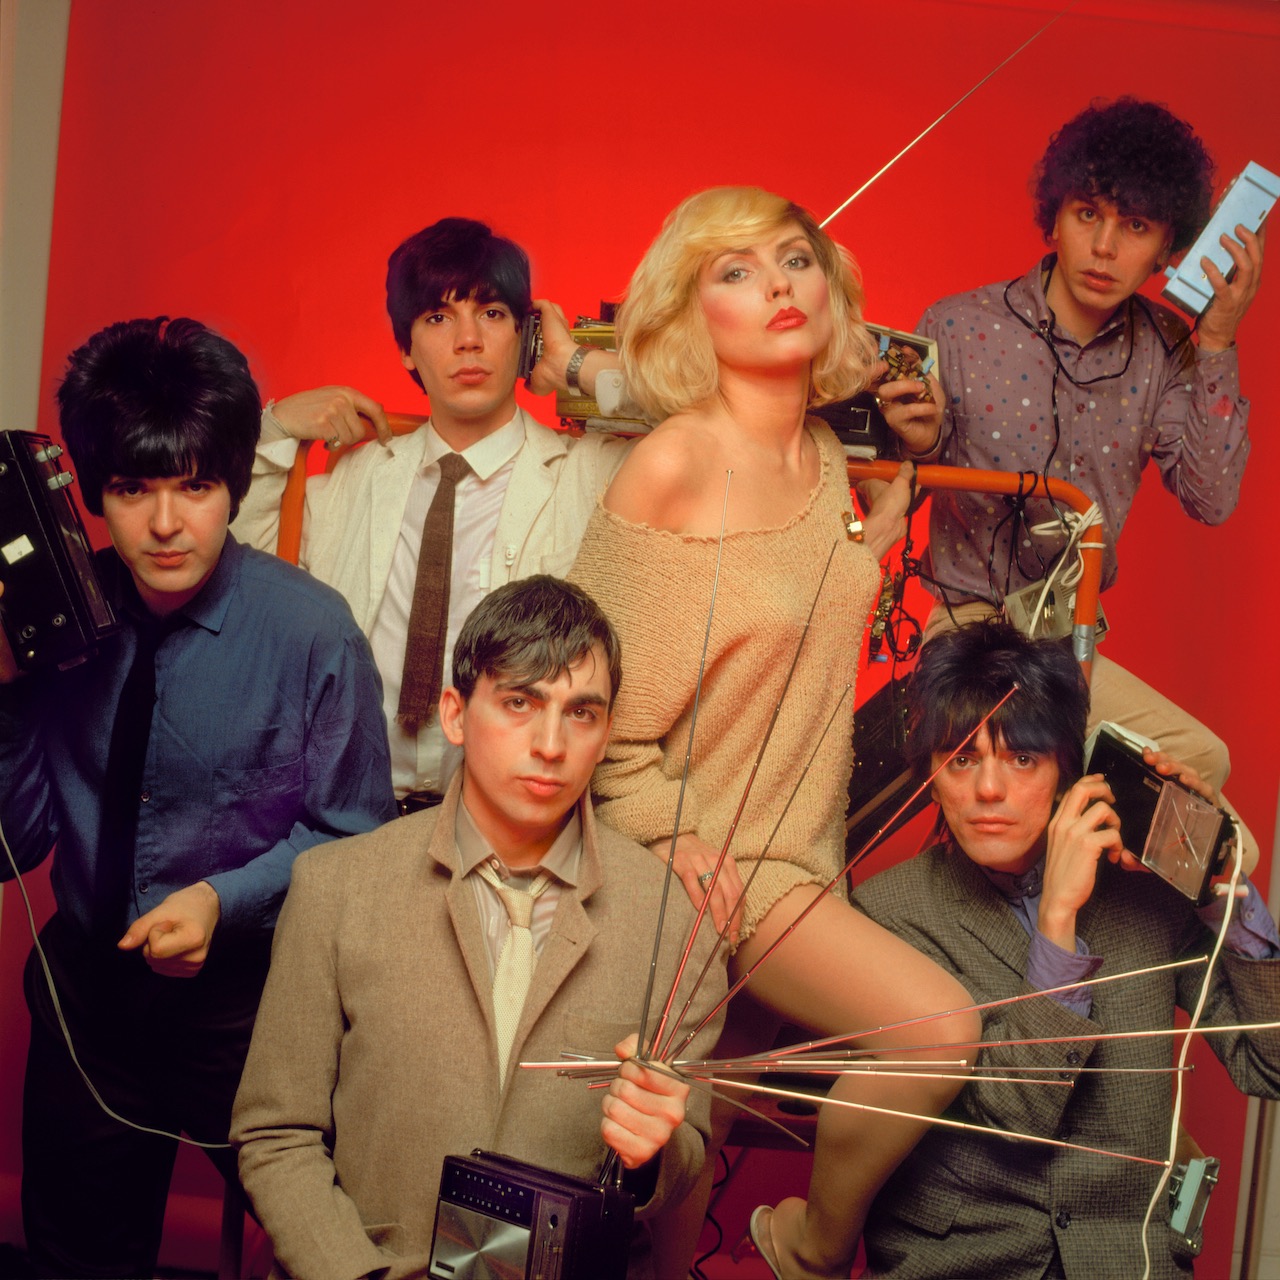 Listen To The Blondie Demo Of ‘I Love You Honey, Give Me A Beer’